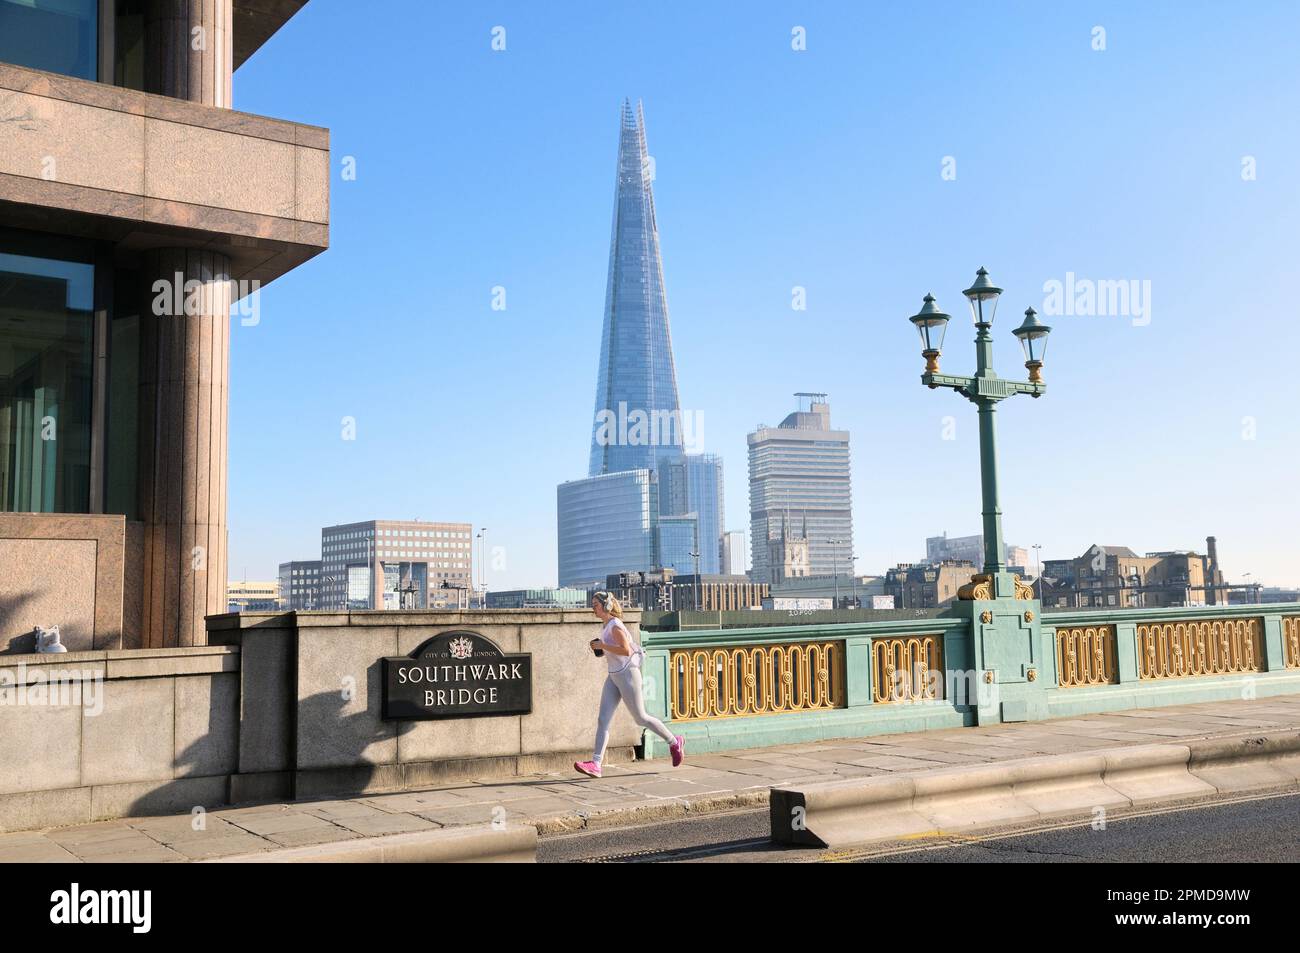 Young woman jogging across Southwark Bridge over River Thames with the Shard building in background. London, England, UK. city, jogger, exercise, jog Stock Photo